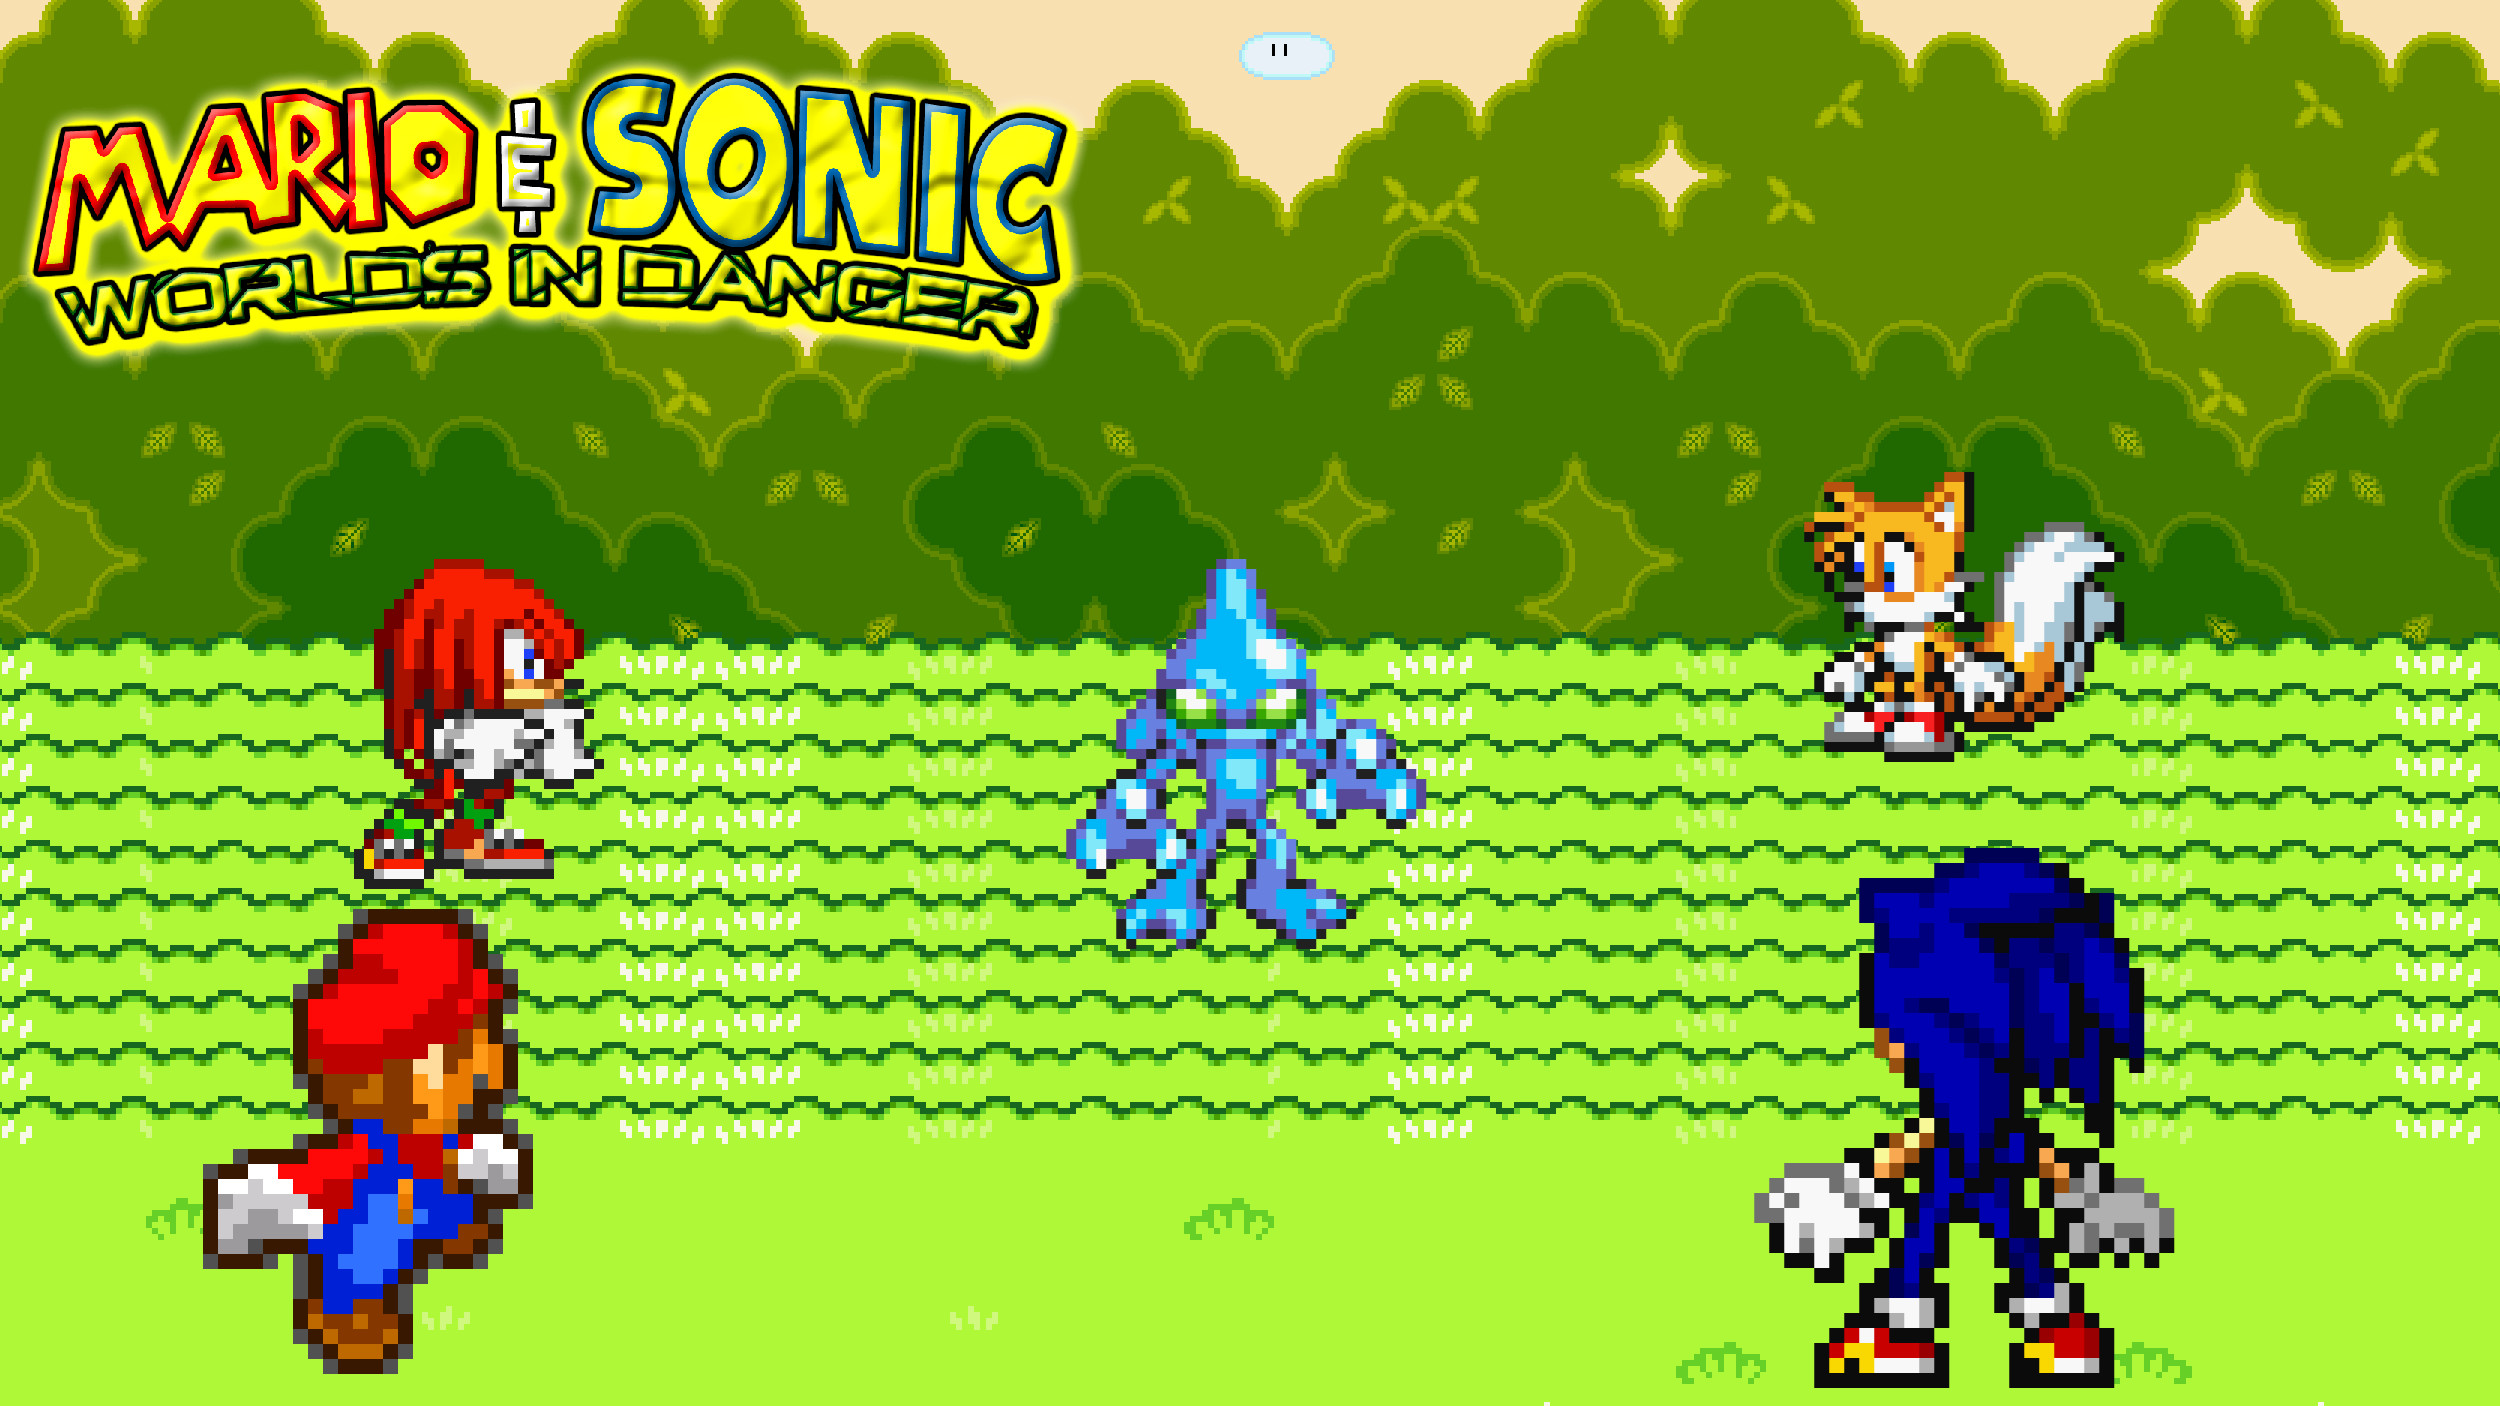 2500x1406 ... jmkrebs30 Mario, Sonic, Tails, and Knuckles vs Chaos by jmkrebs30